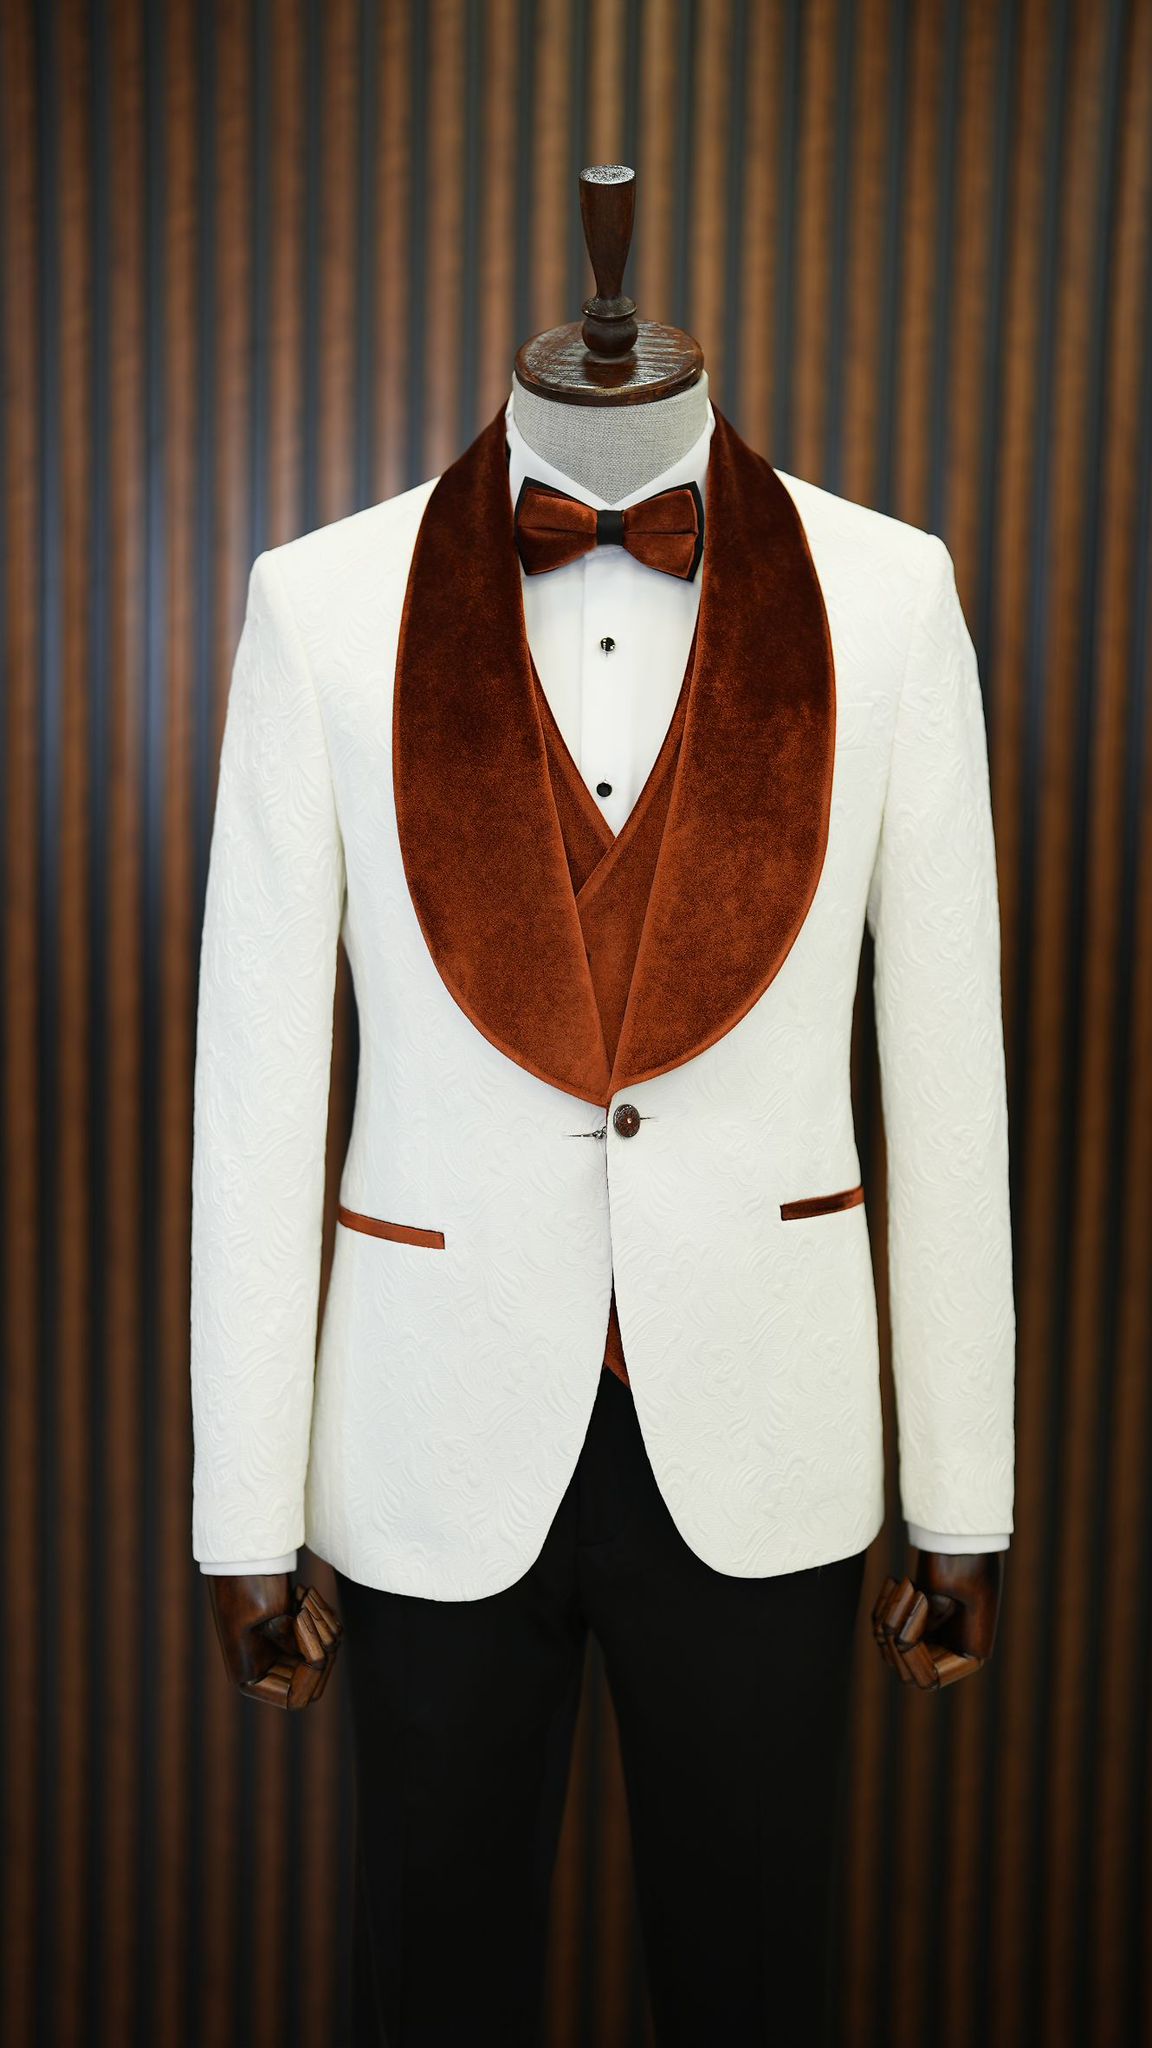 A Brown and White Tuxedo Suit  on display.